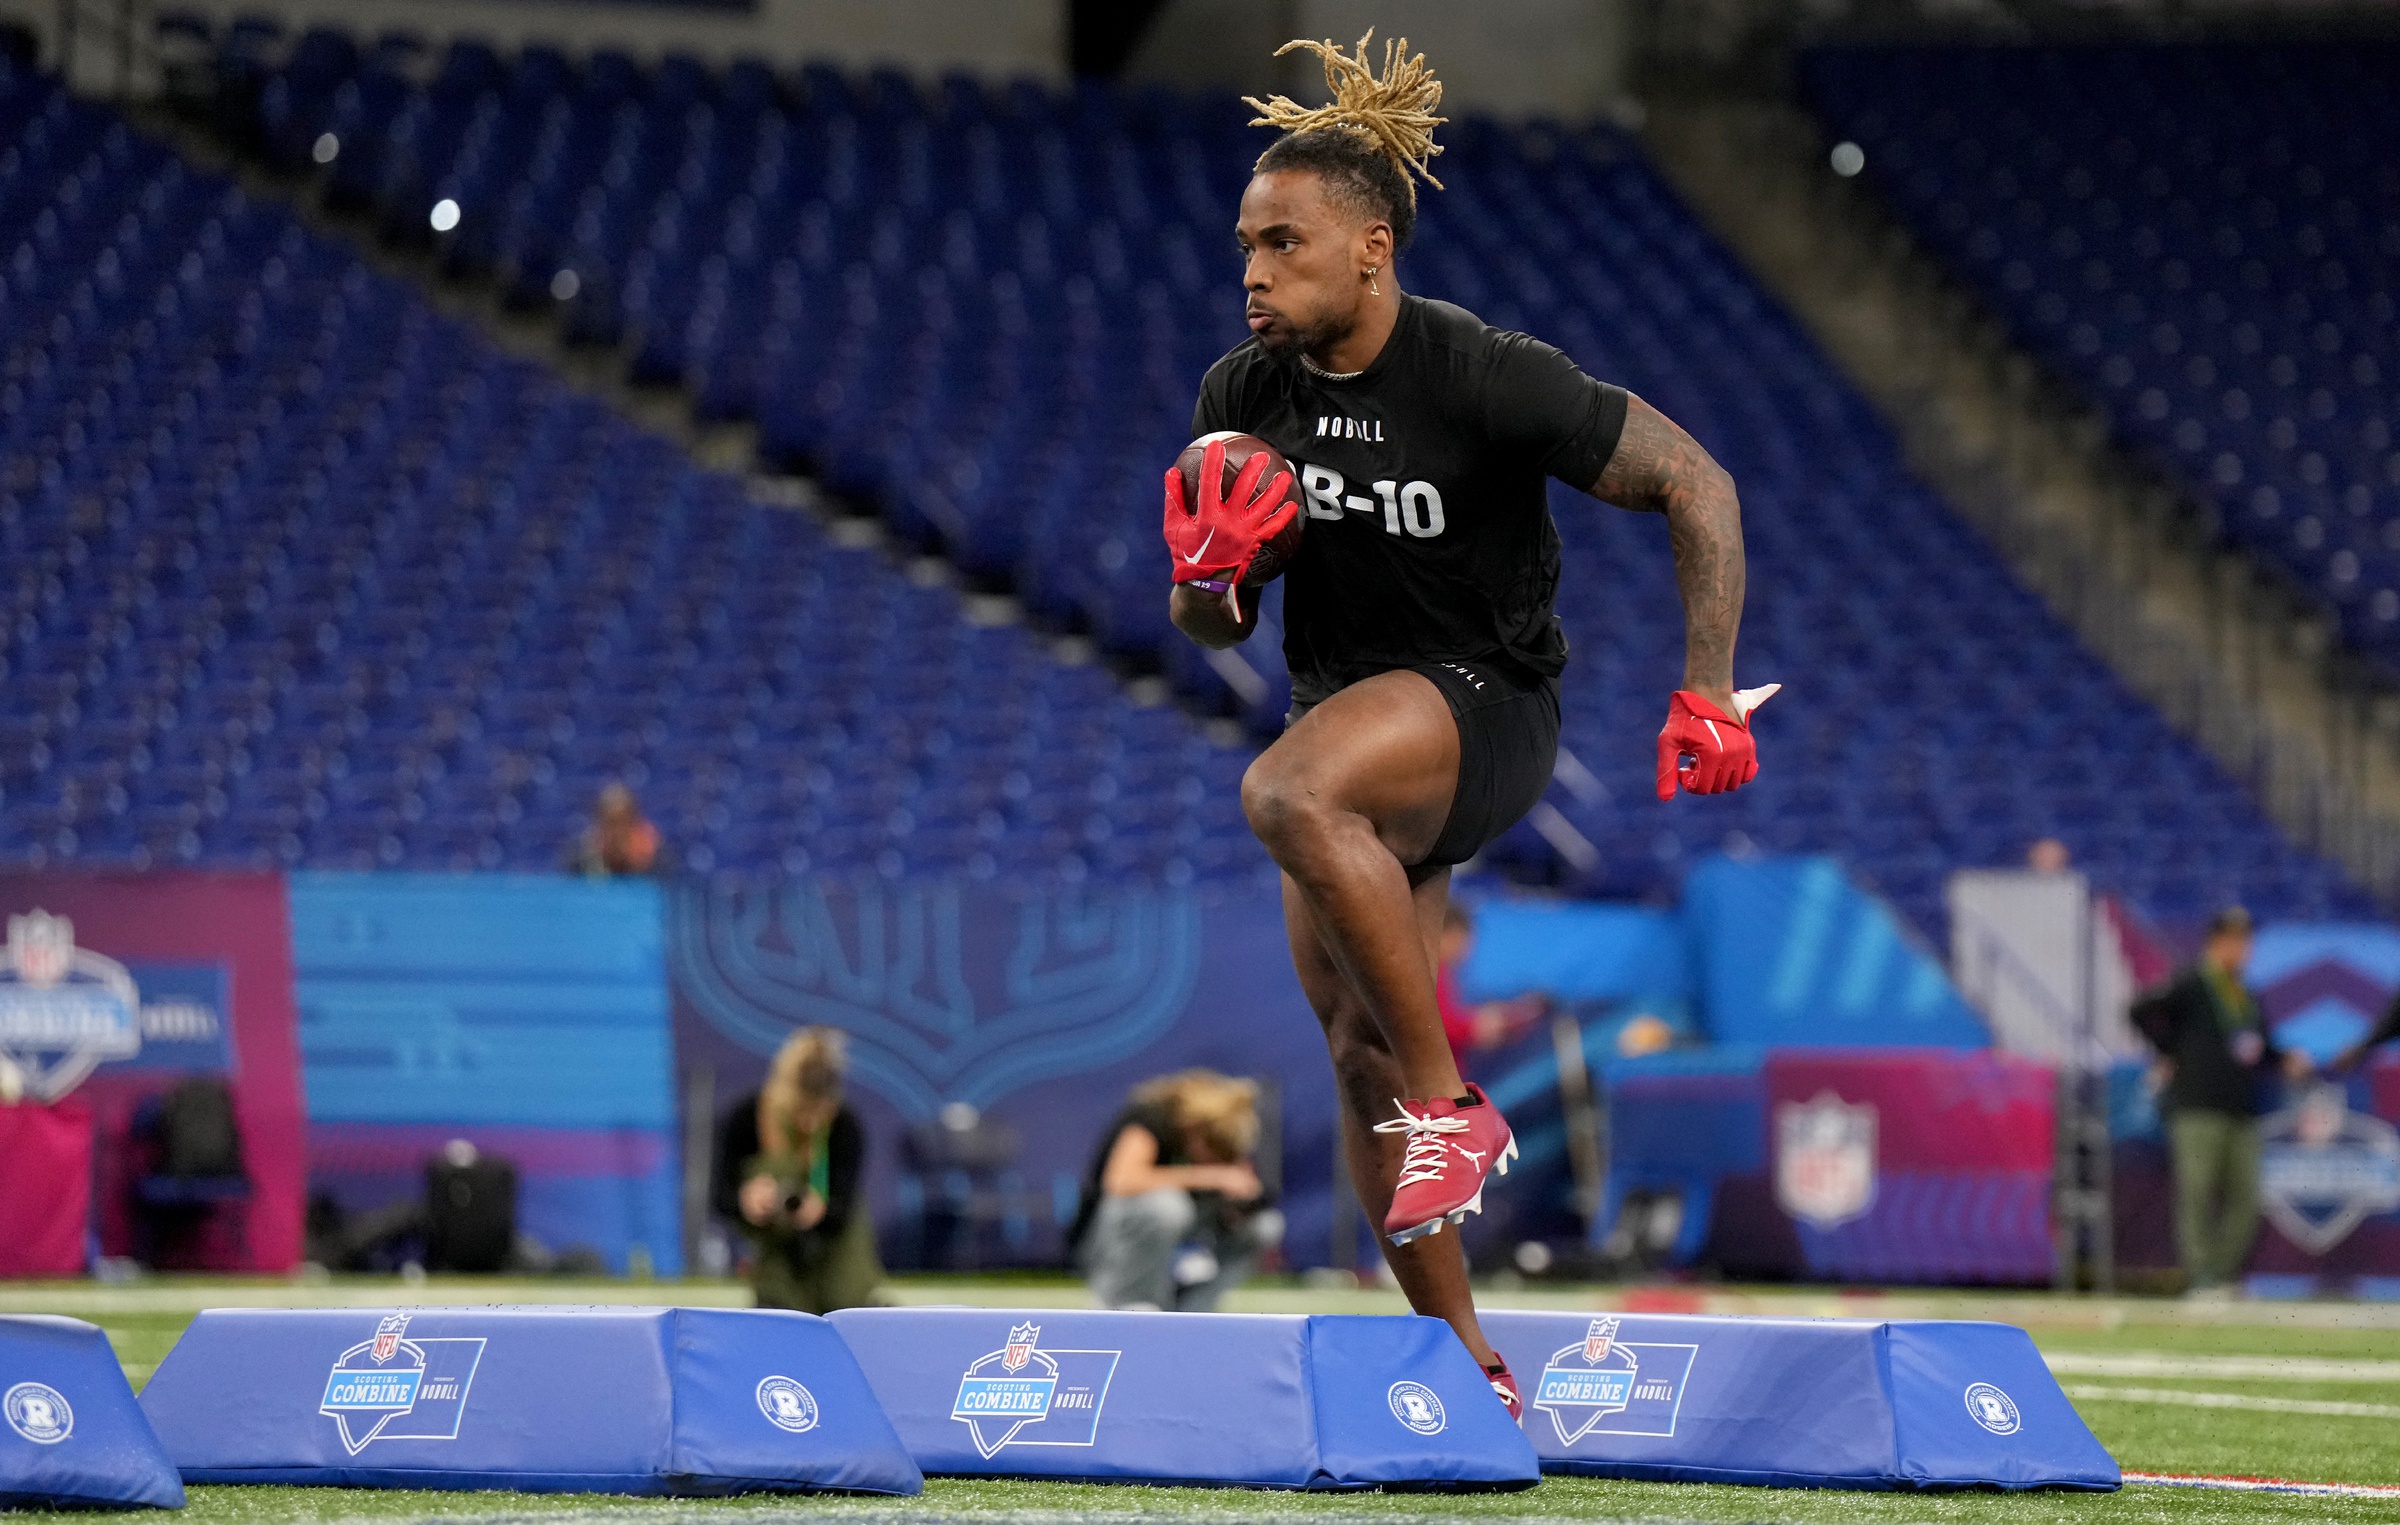 Where to buy NOBULL NFL Combine official gear 